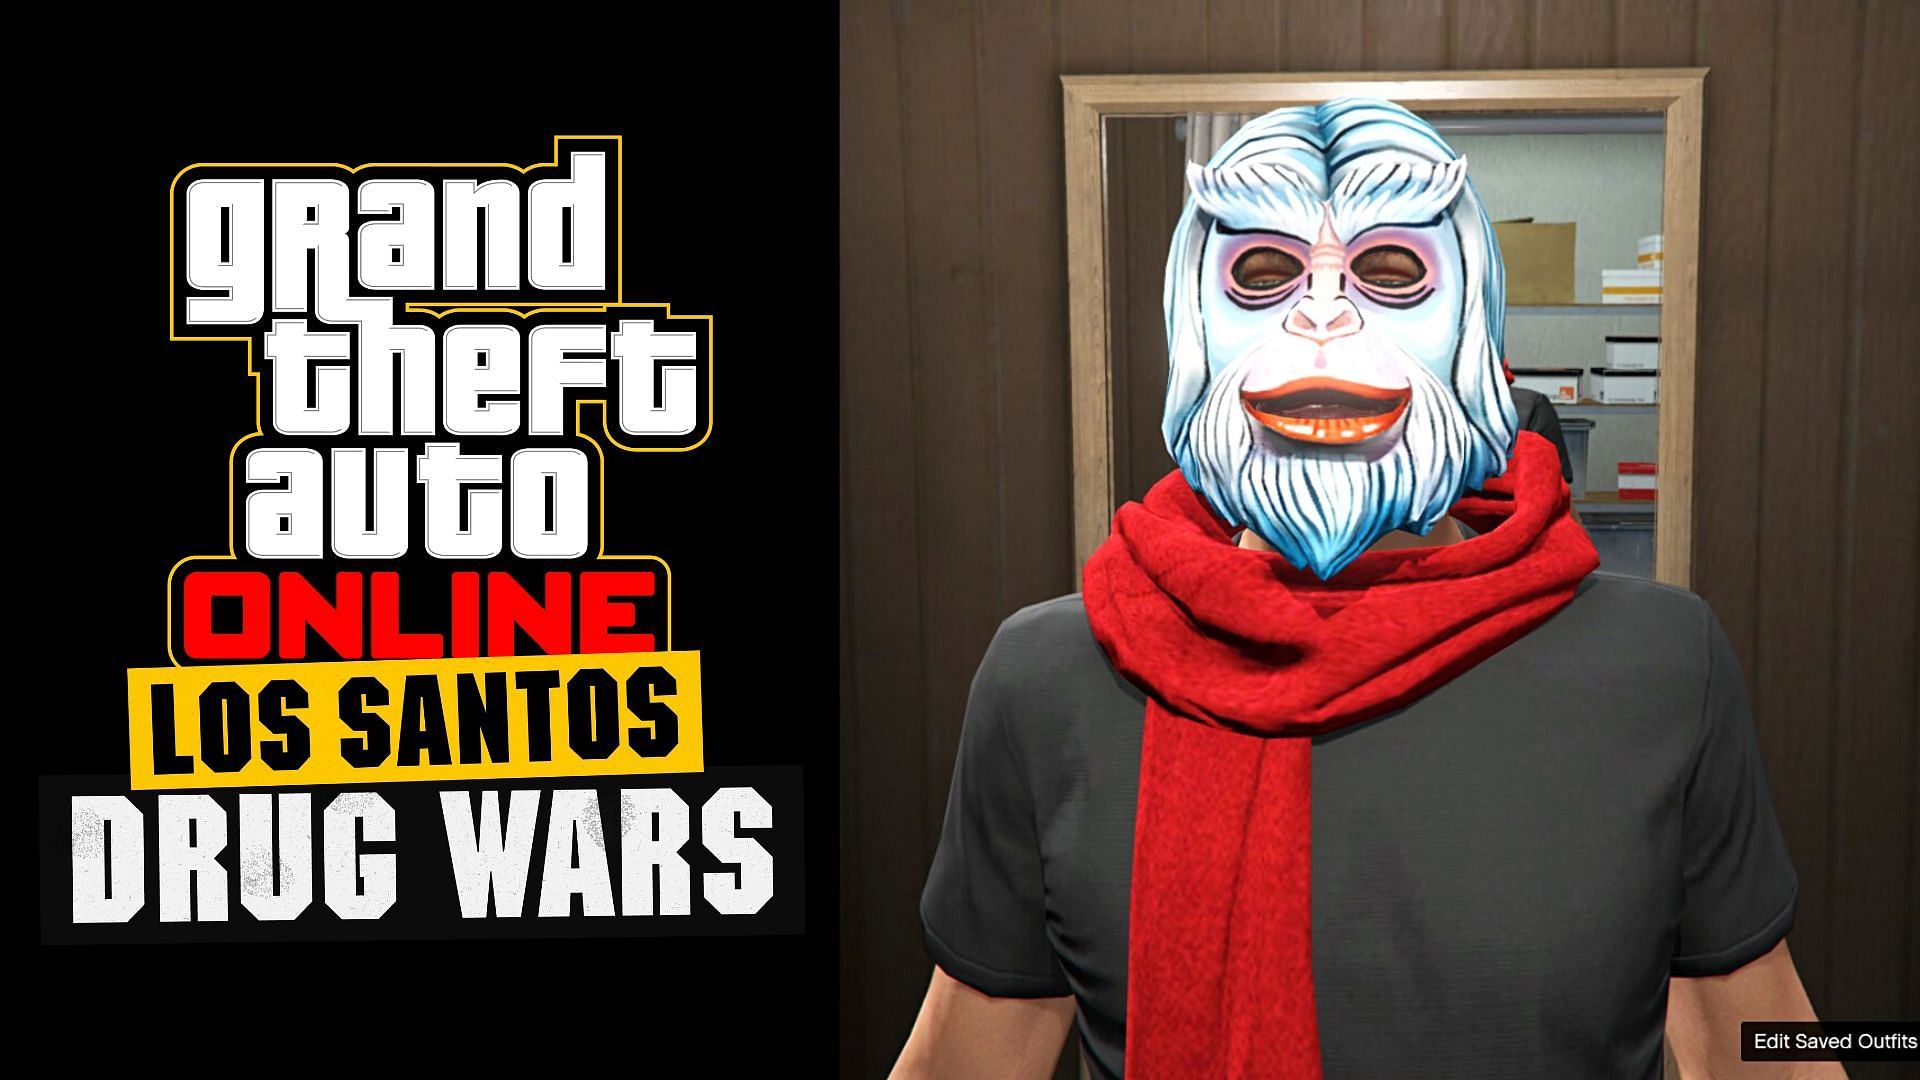 The Gooch, The Snowmen Collectibles, and many more festive-themed items reportedly coming to GTA Online snow update as part of Los Santos Drug Wars drip-feed (Image via florbal on Twitter)